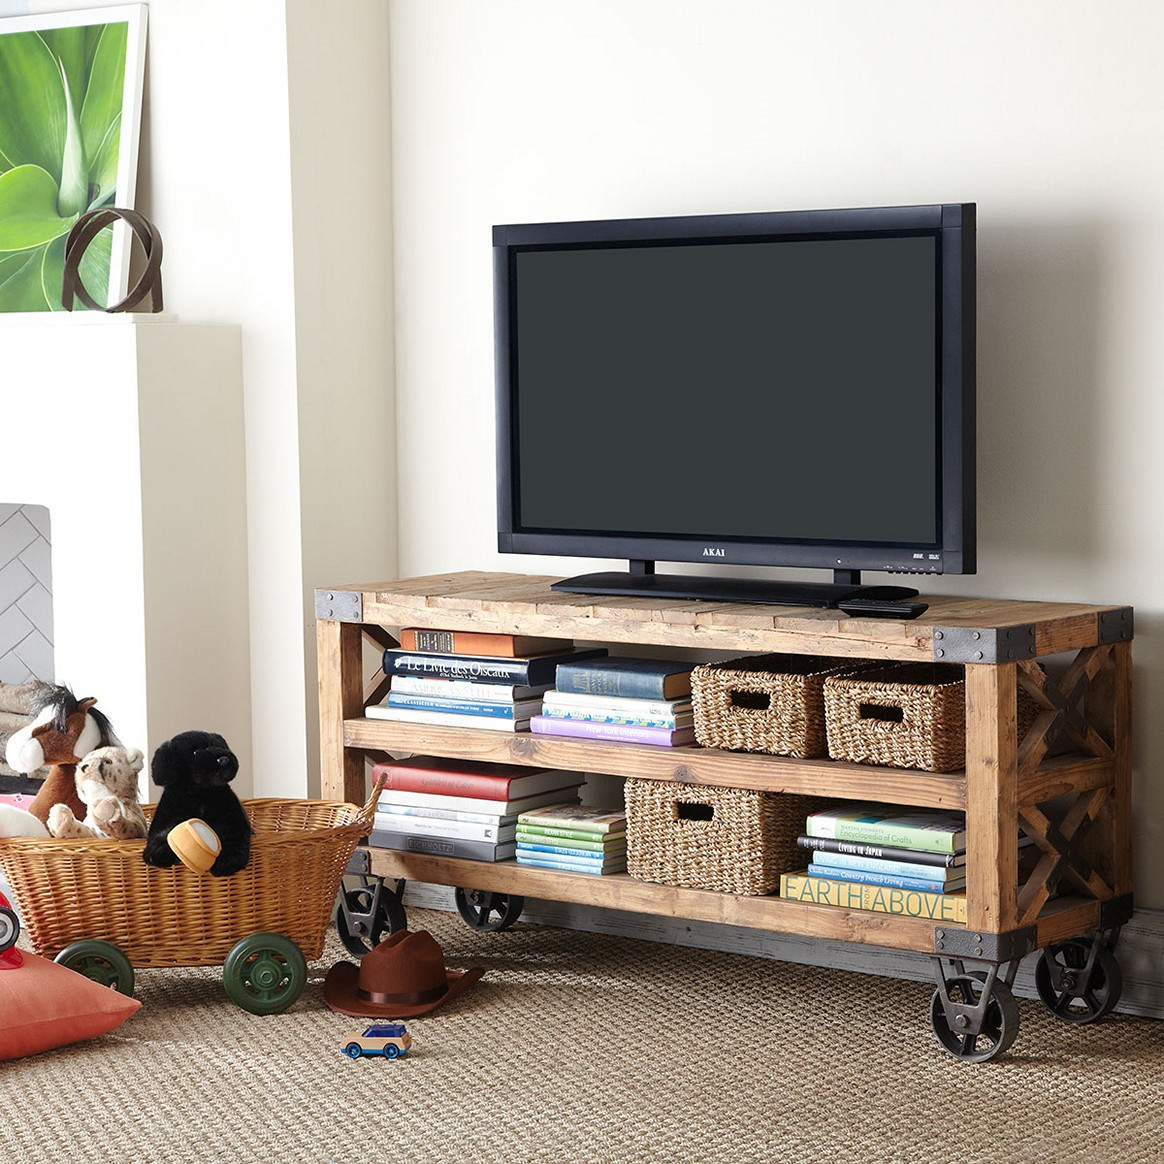 Best ideas about Creative Tv Stand Ideas . Save or Pin 21 DIY TV Stand Ideas for Your Weekend Home Project Now.